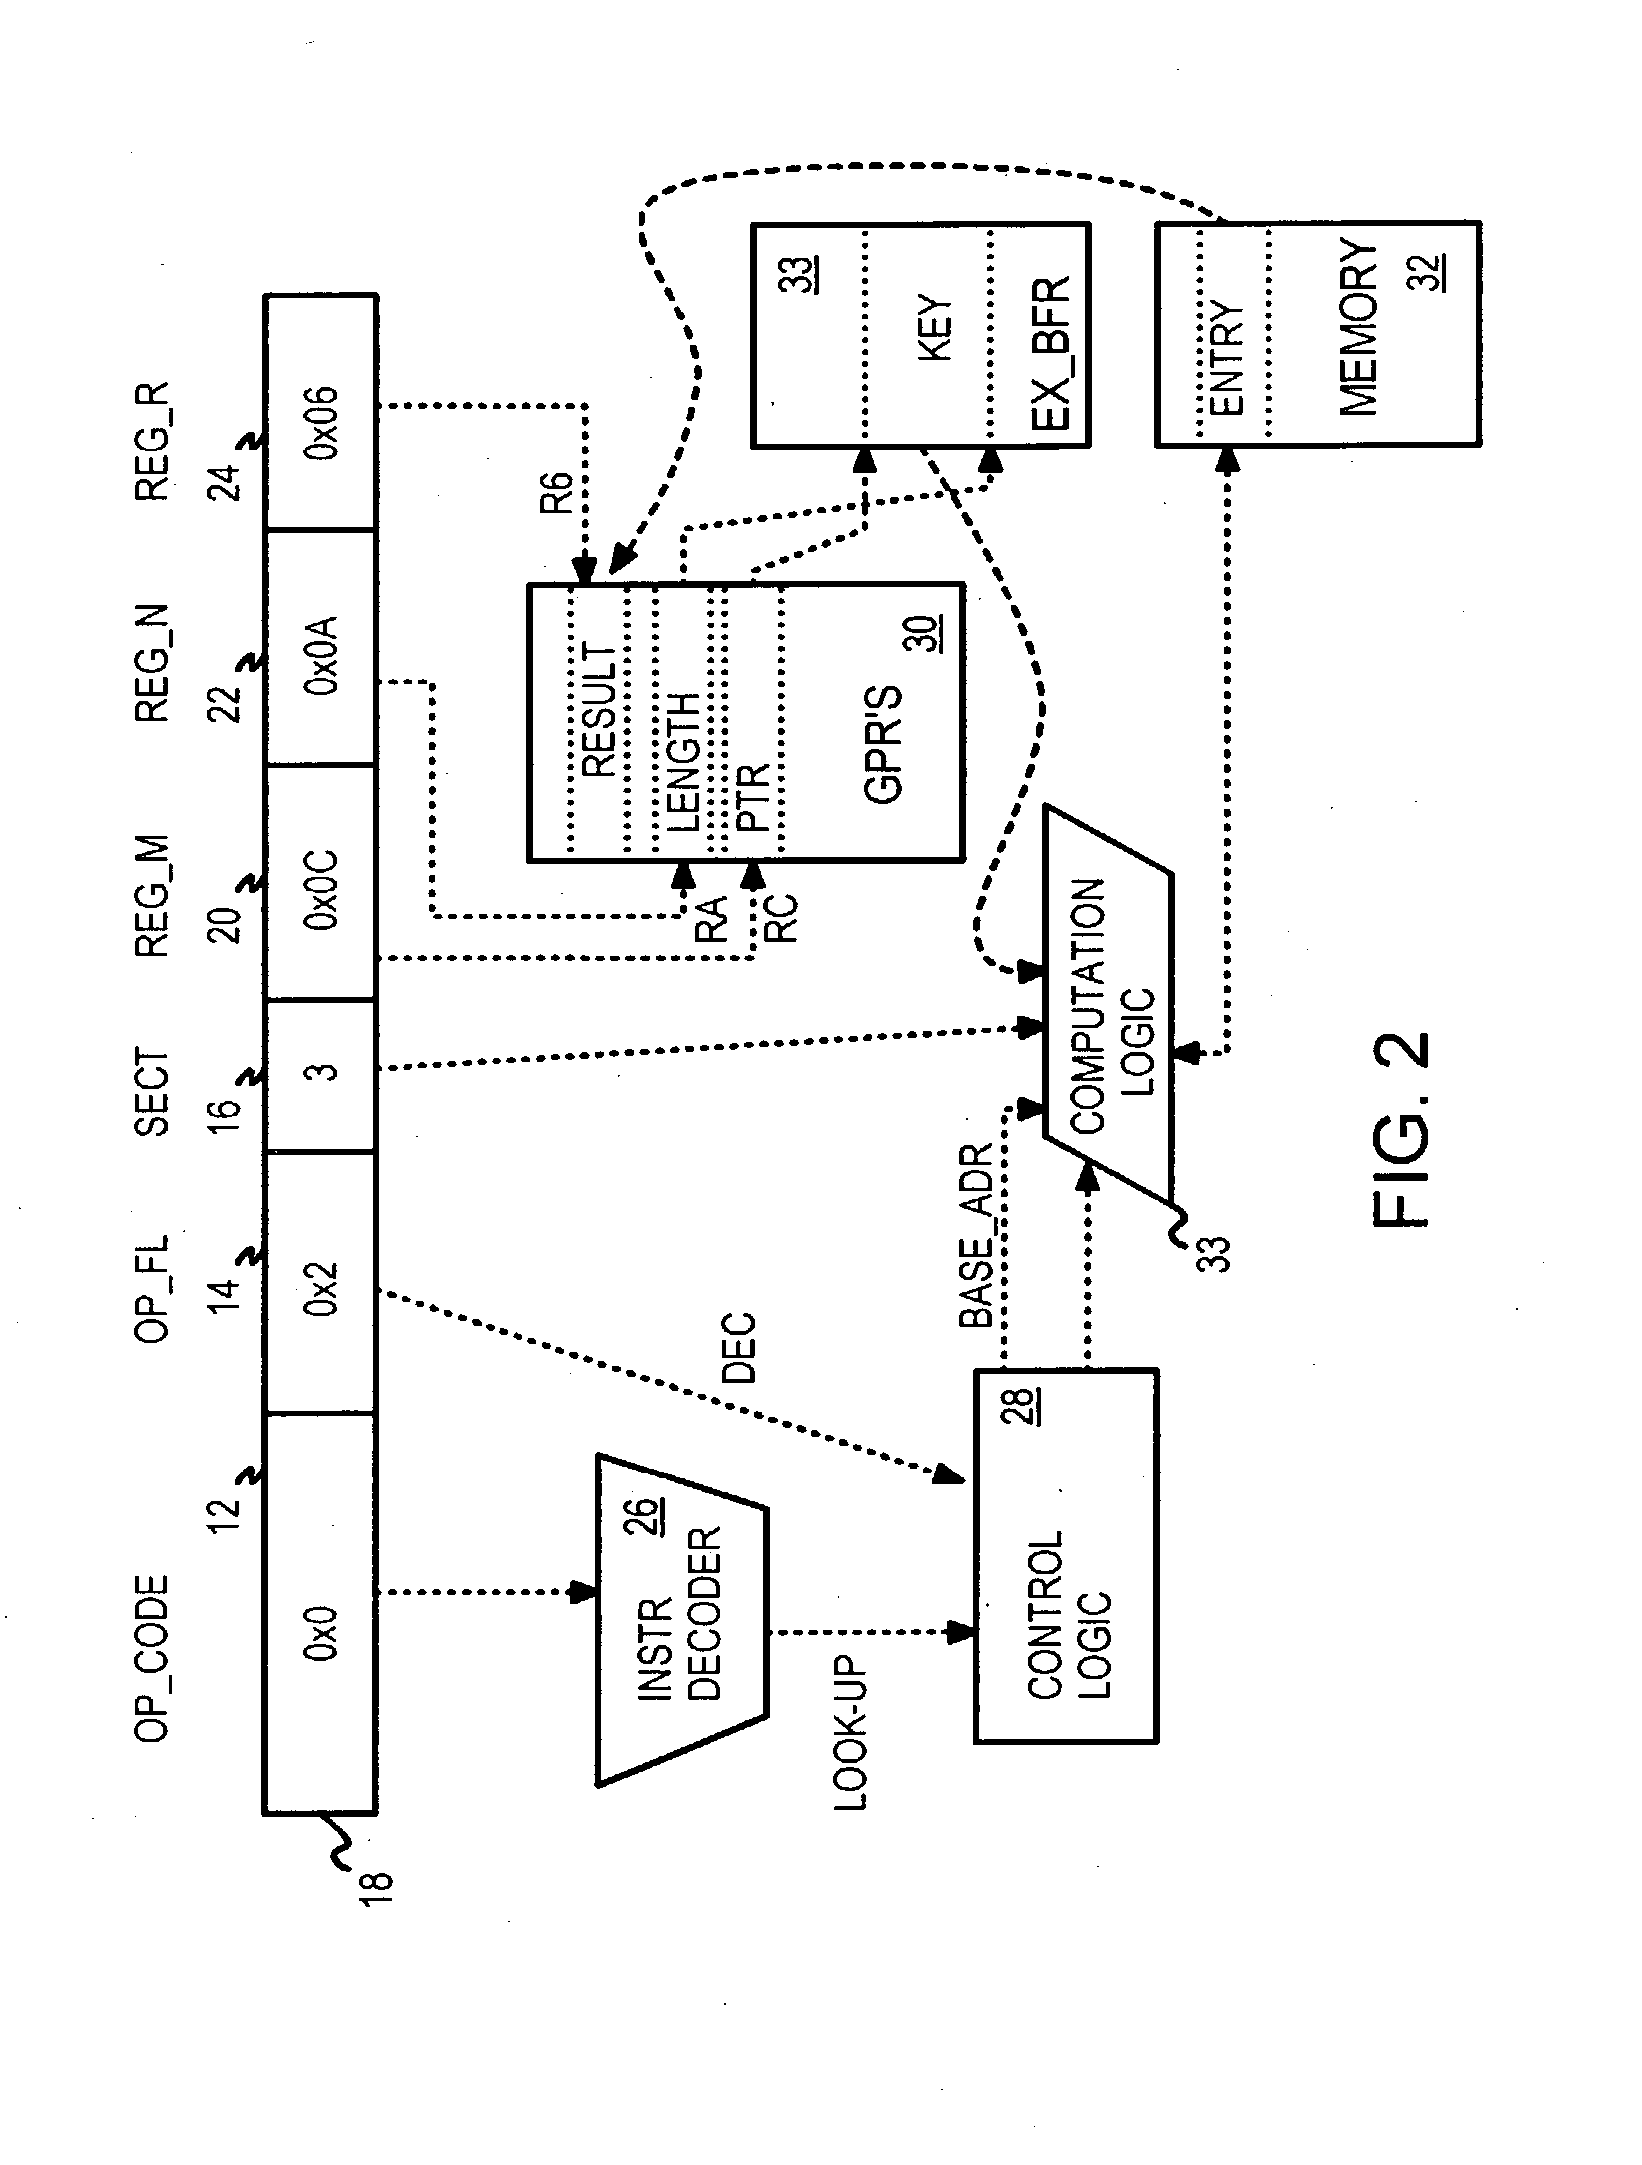 Native Lookup Instruction for File-Access Processor Searching a Three-Level Lookup Cache for Variable-Length Keys